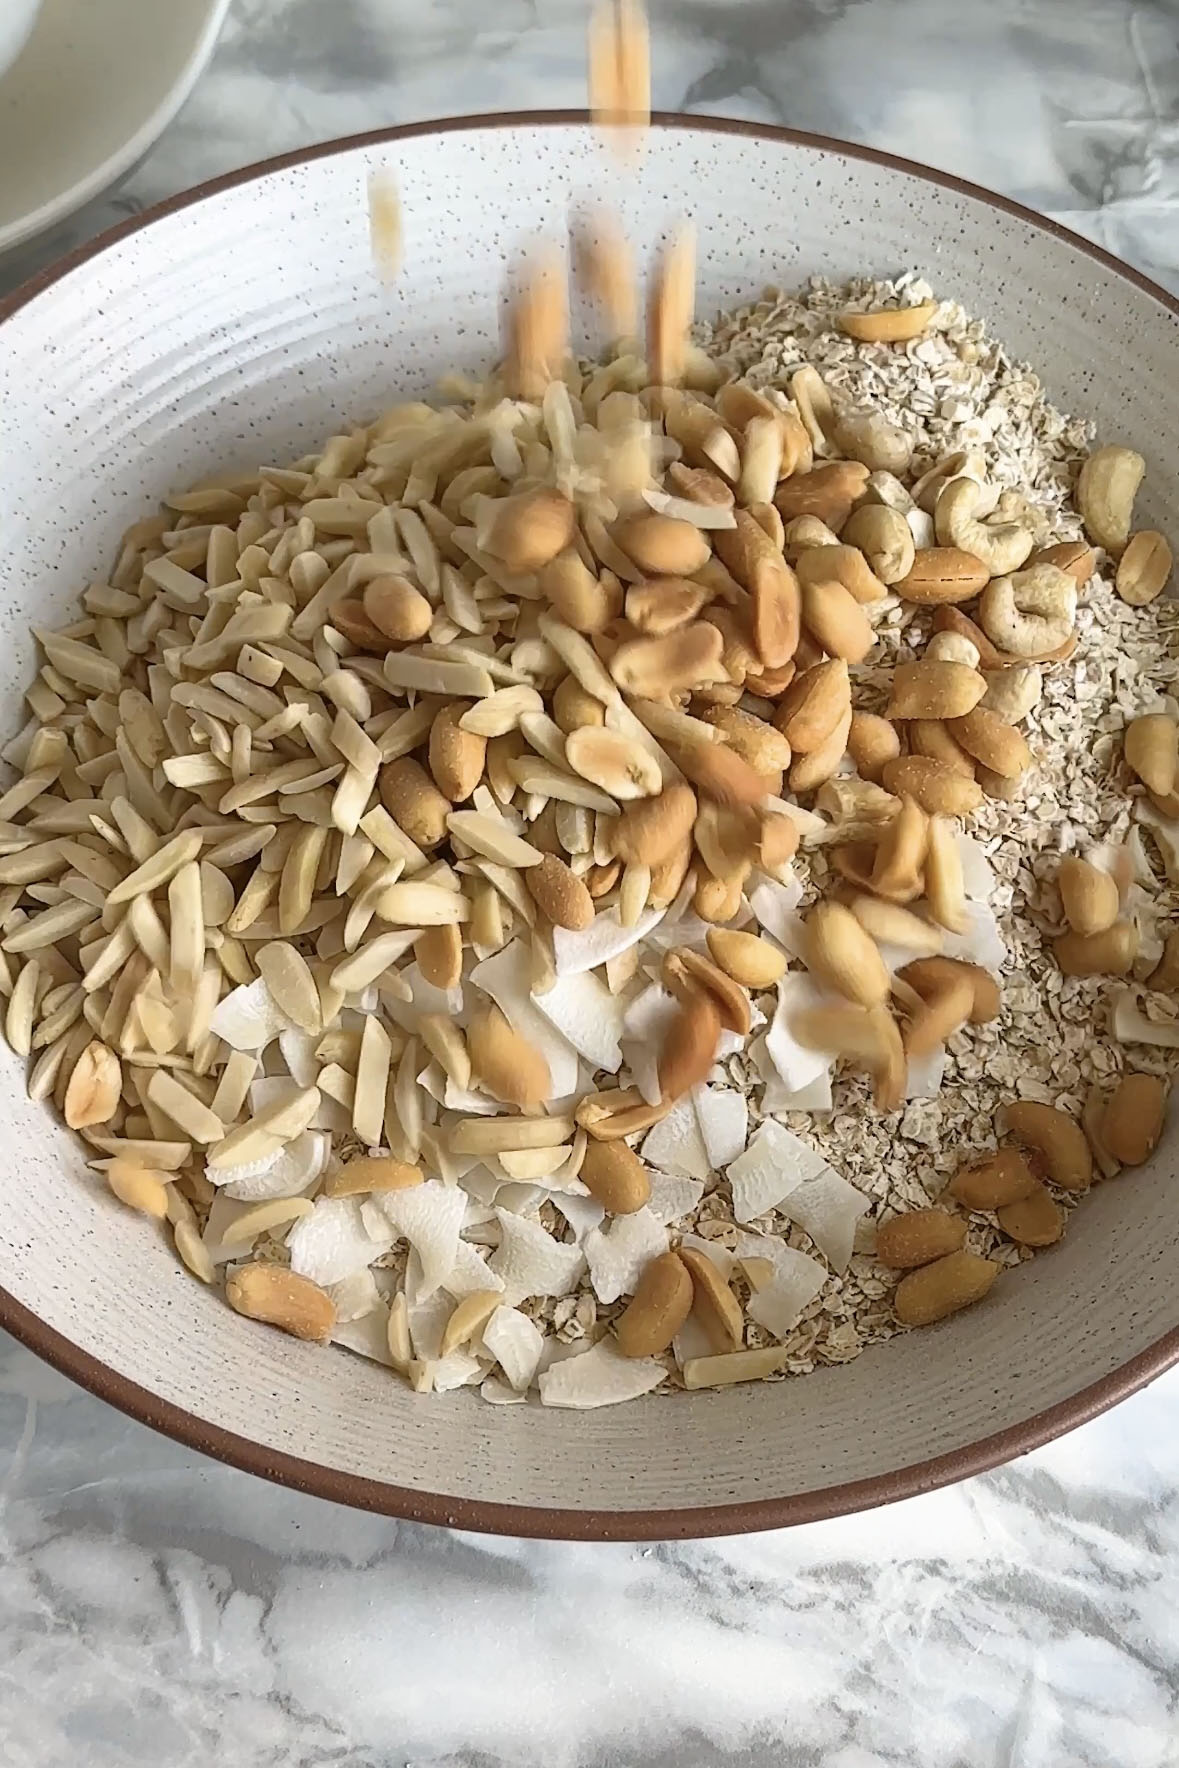 Nuts are poured on top of oats and coconut in a large bowl.